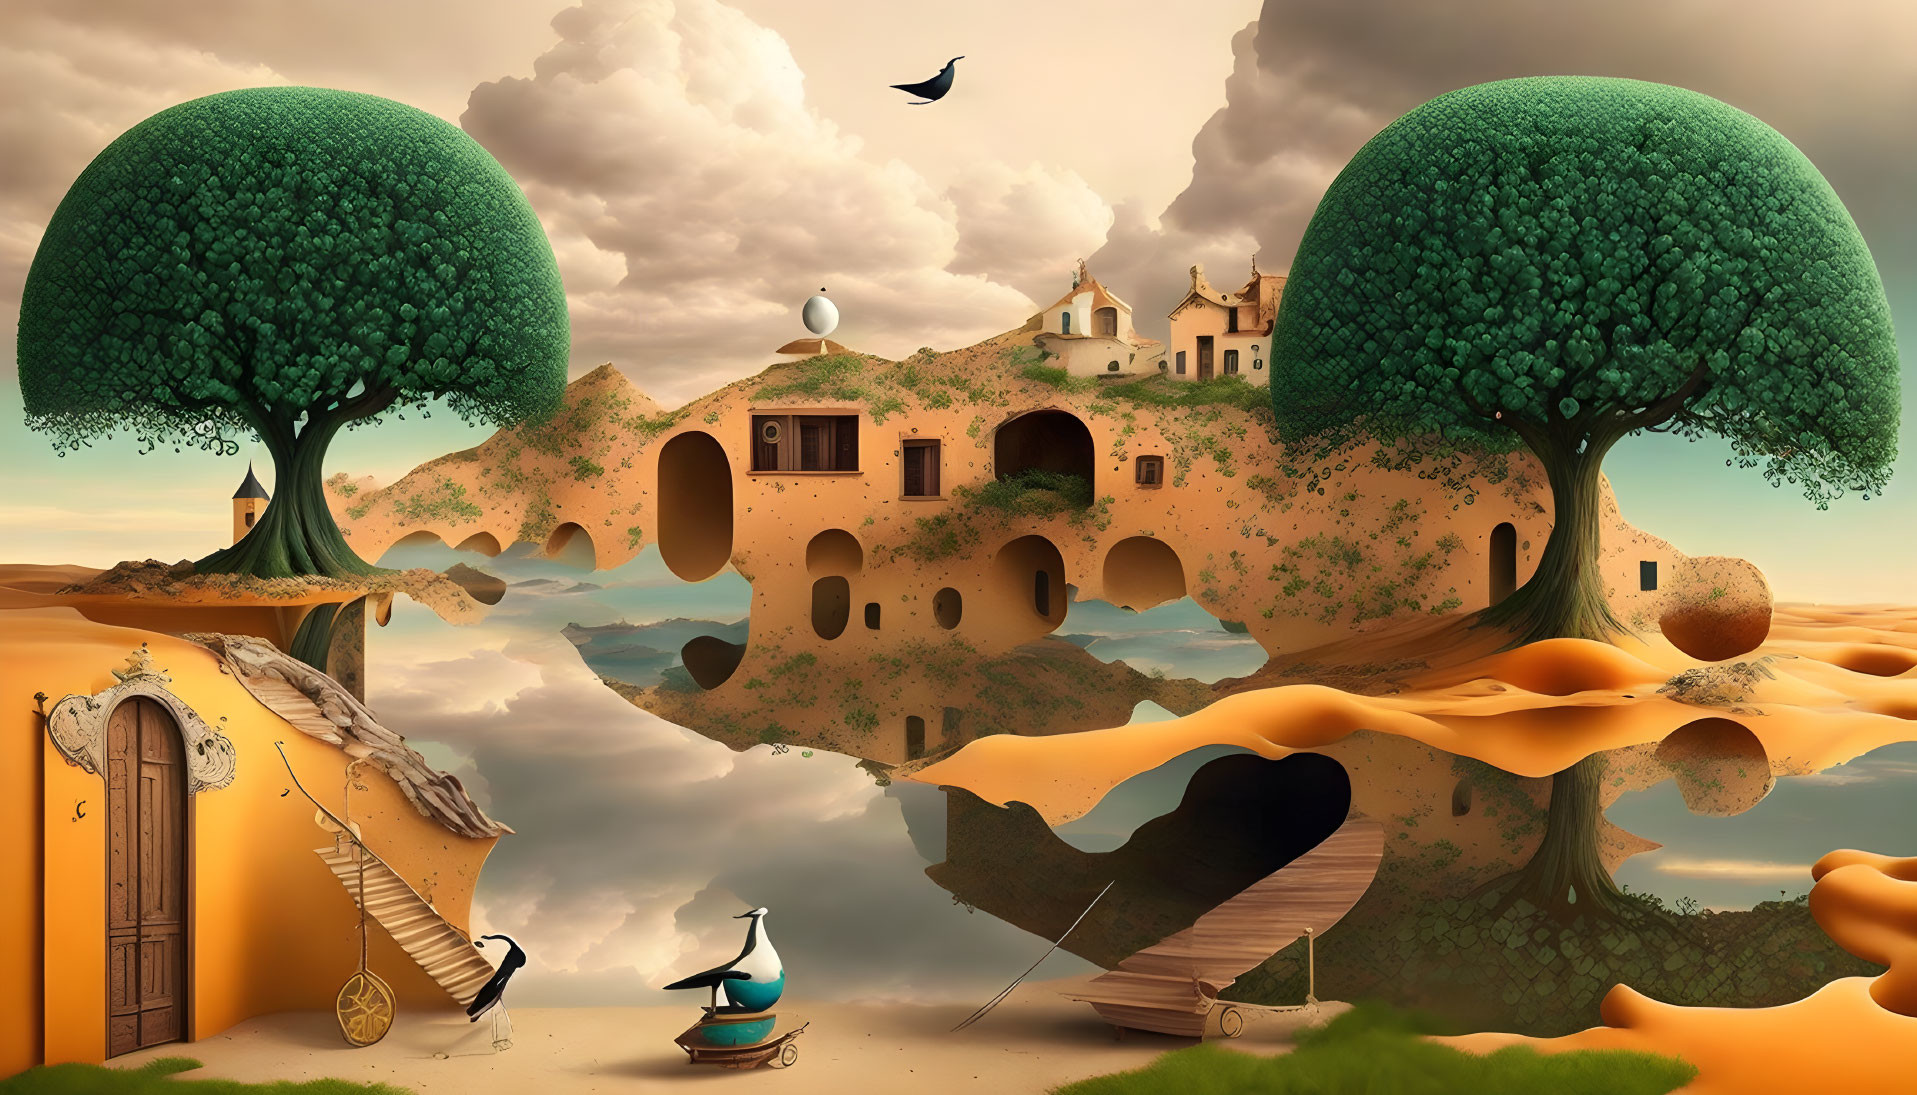 Surreal landscape with oversized trees, floating islands, boat, whimsical architecture, and flying bird